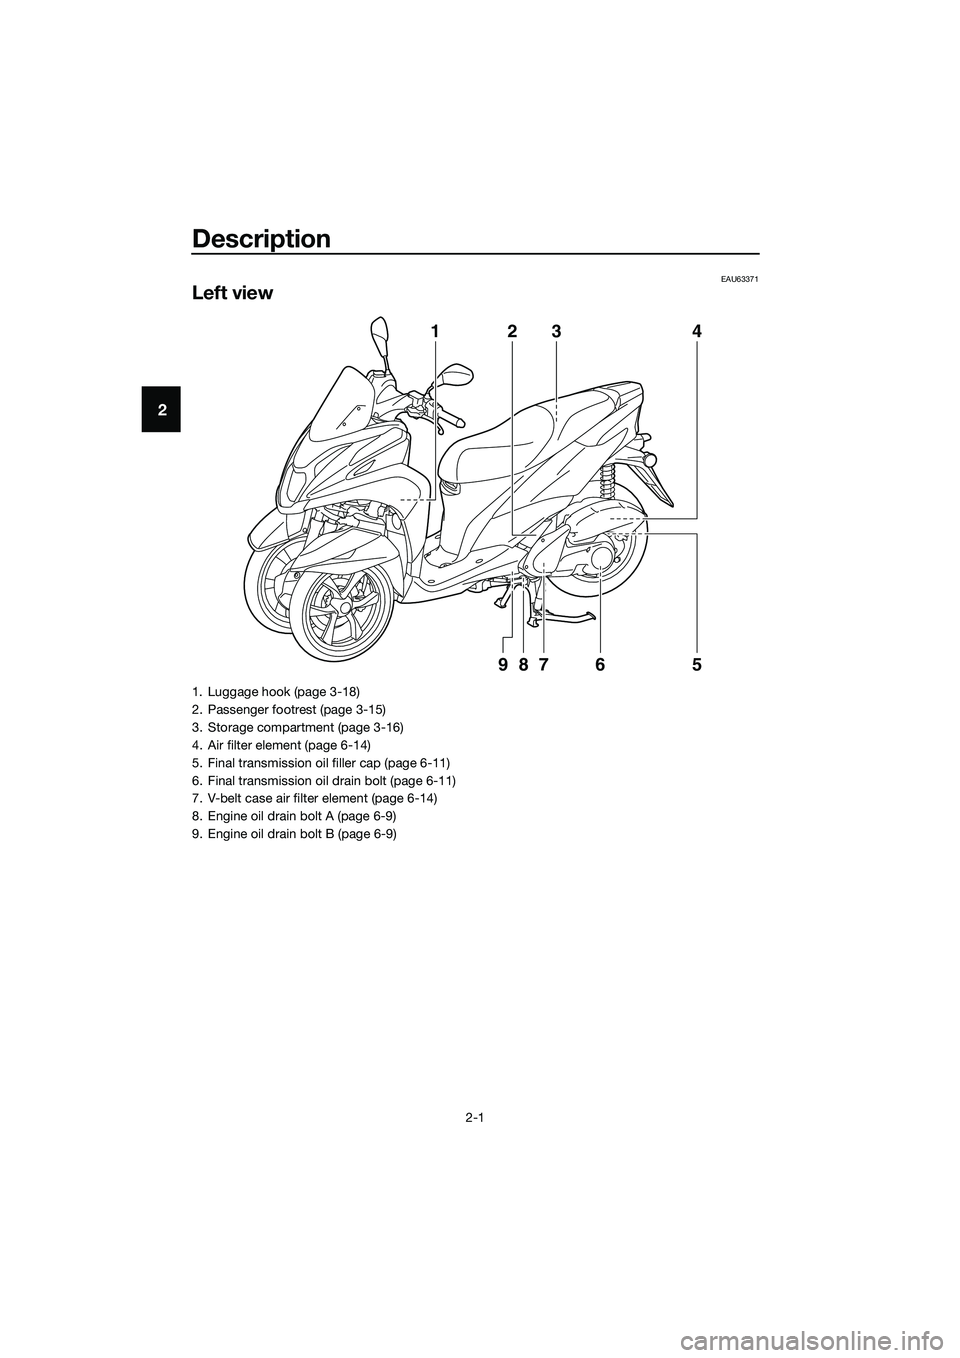 YAMAHA TRICITY 2017 User Guide Description
2-1
2
EAU63371
Left view
123 4
5 6 987
1. Luggage hook (page 3-18)
2. Passenger footrest (page 3-15)
3. Storage compartment (page 3-16)
4. Air filter element (page 6-14)
5. Final transmiss